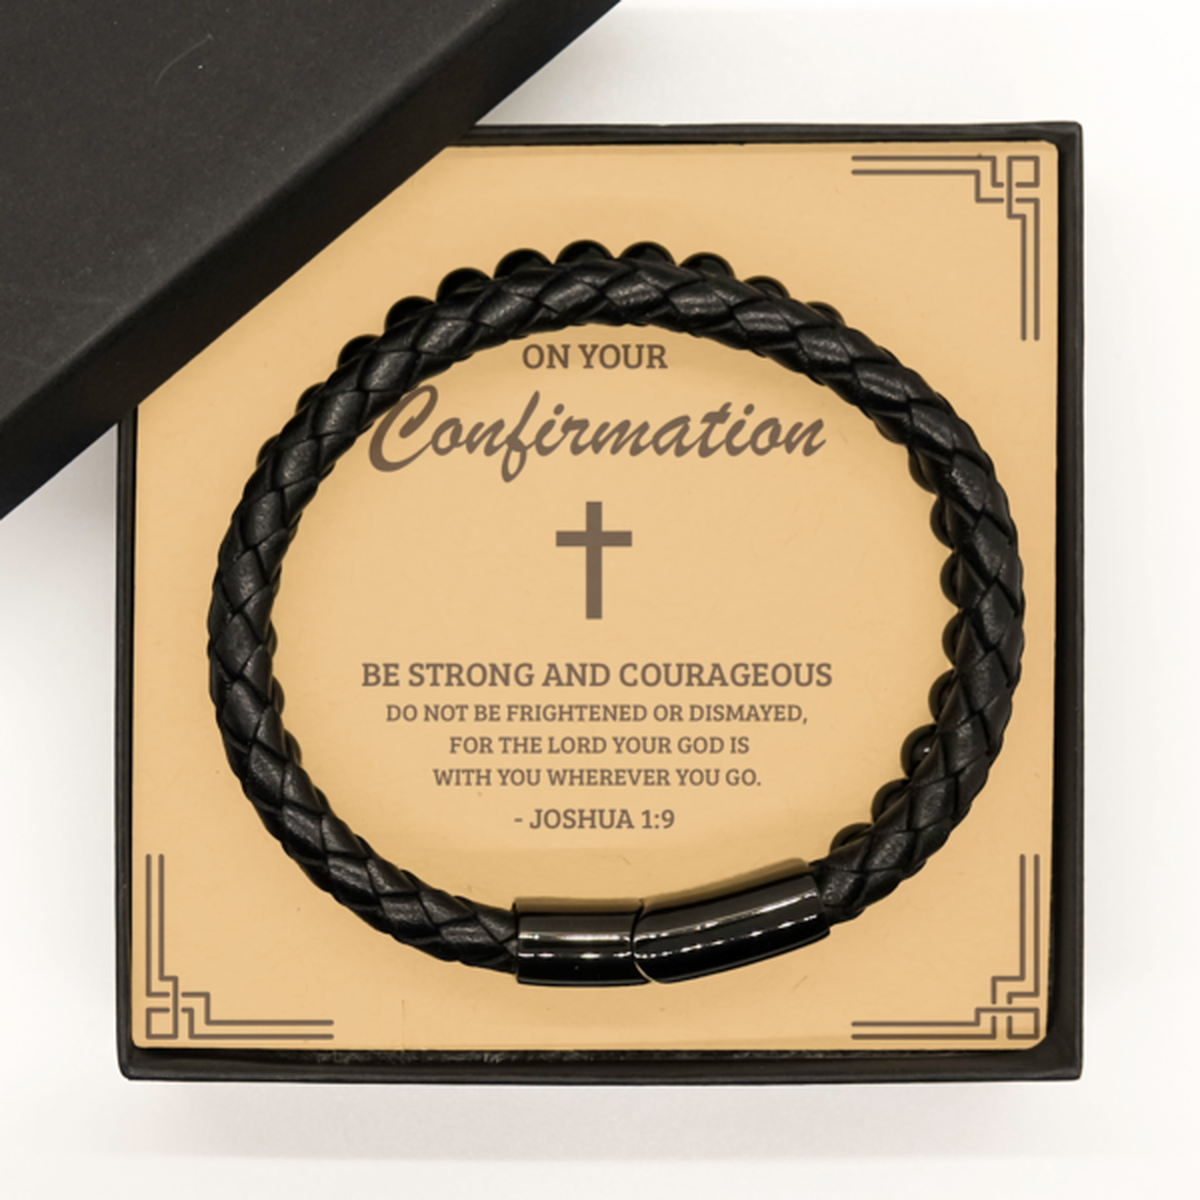 Confirmation Gifts for Teenage Boys, Be strong and courageous, Stone Leather Bracelet with Bible Verse Message Card, Religious Catholic Bracelet for Son, Grandson, Dad, Godfather